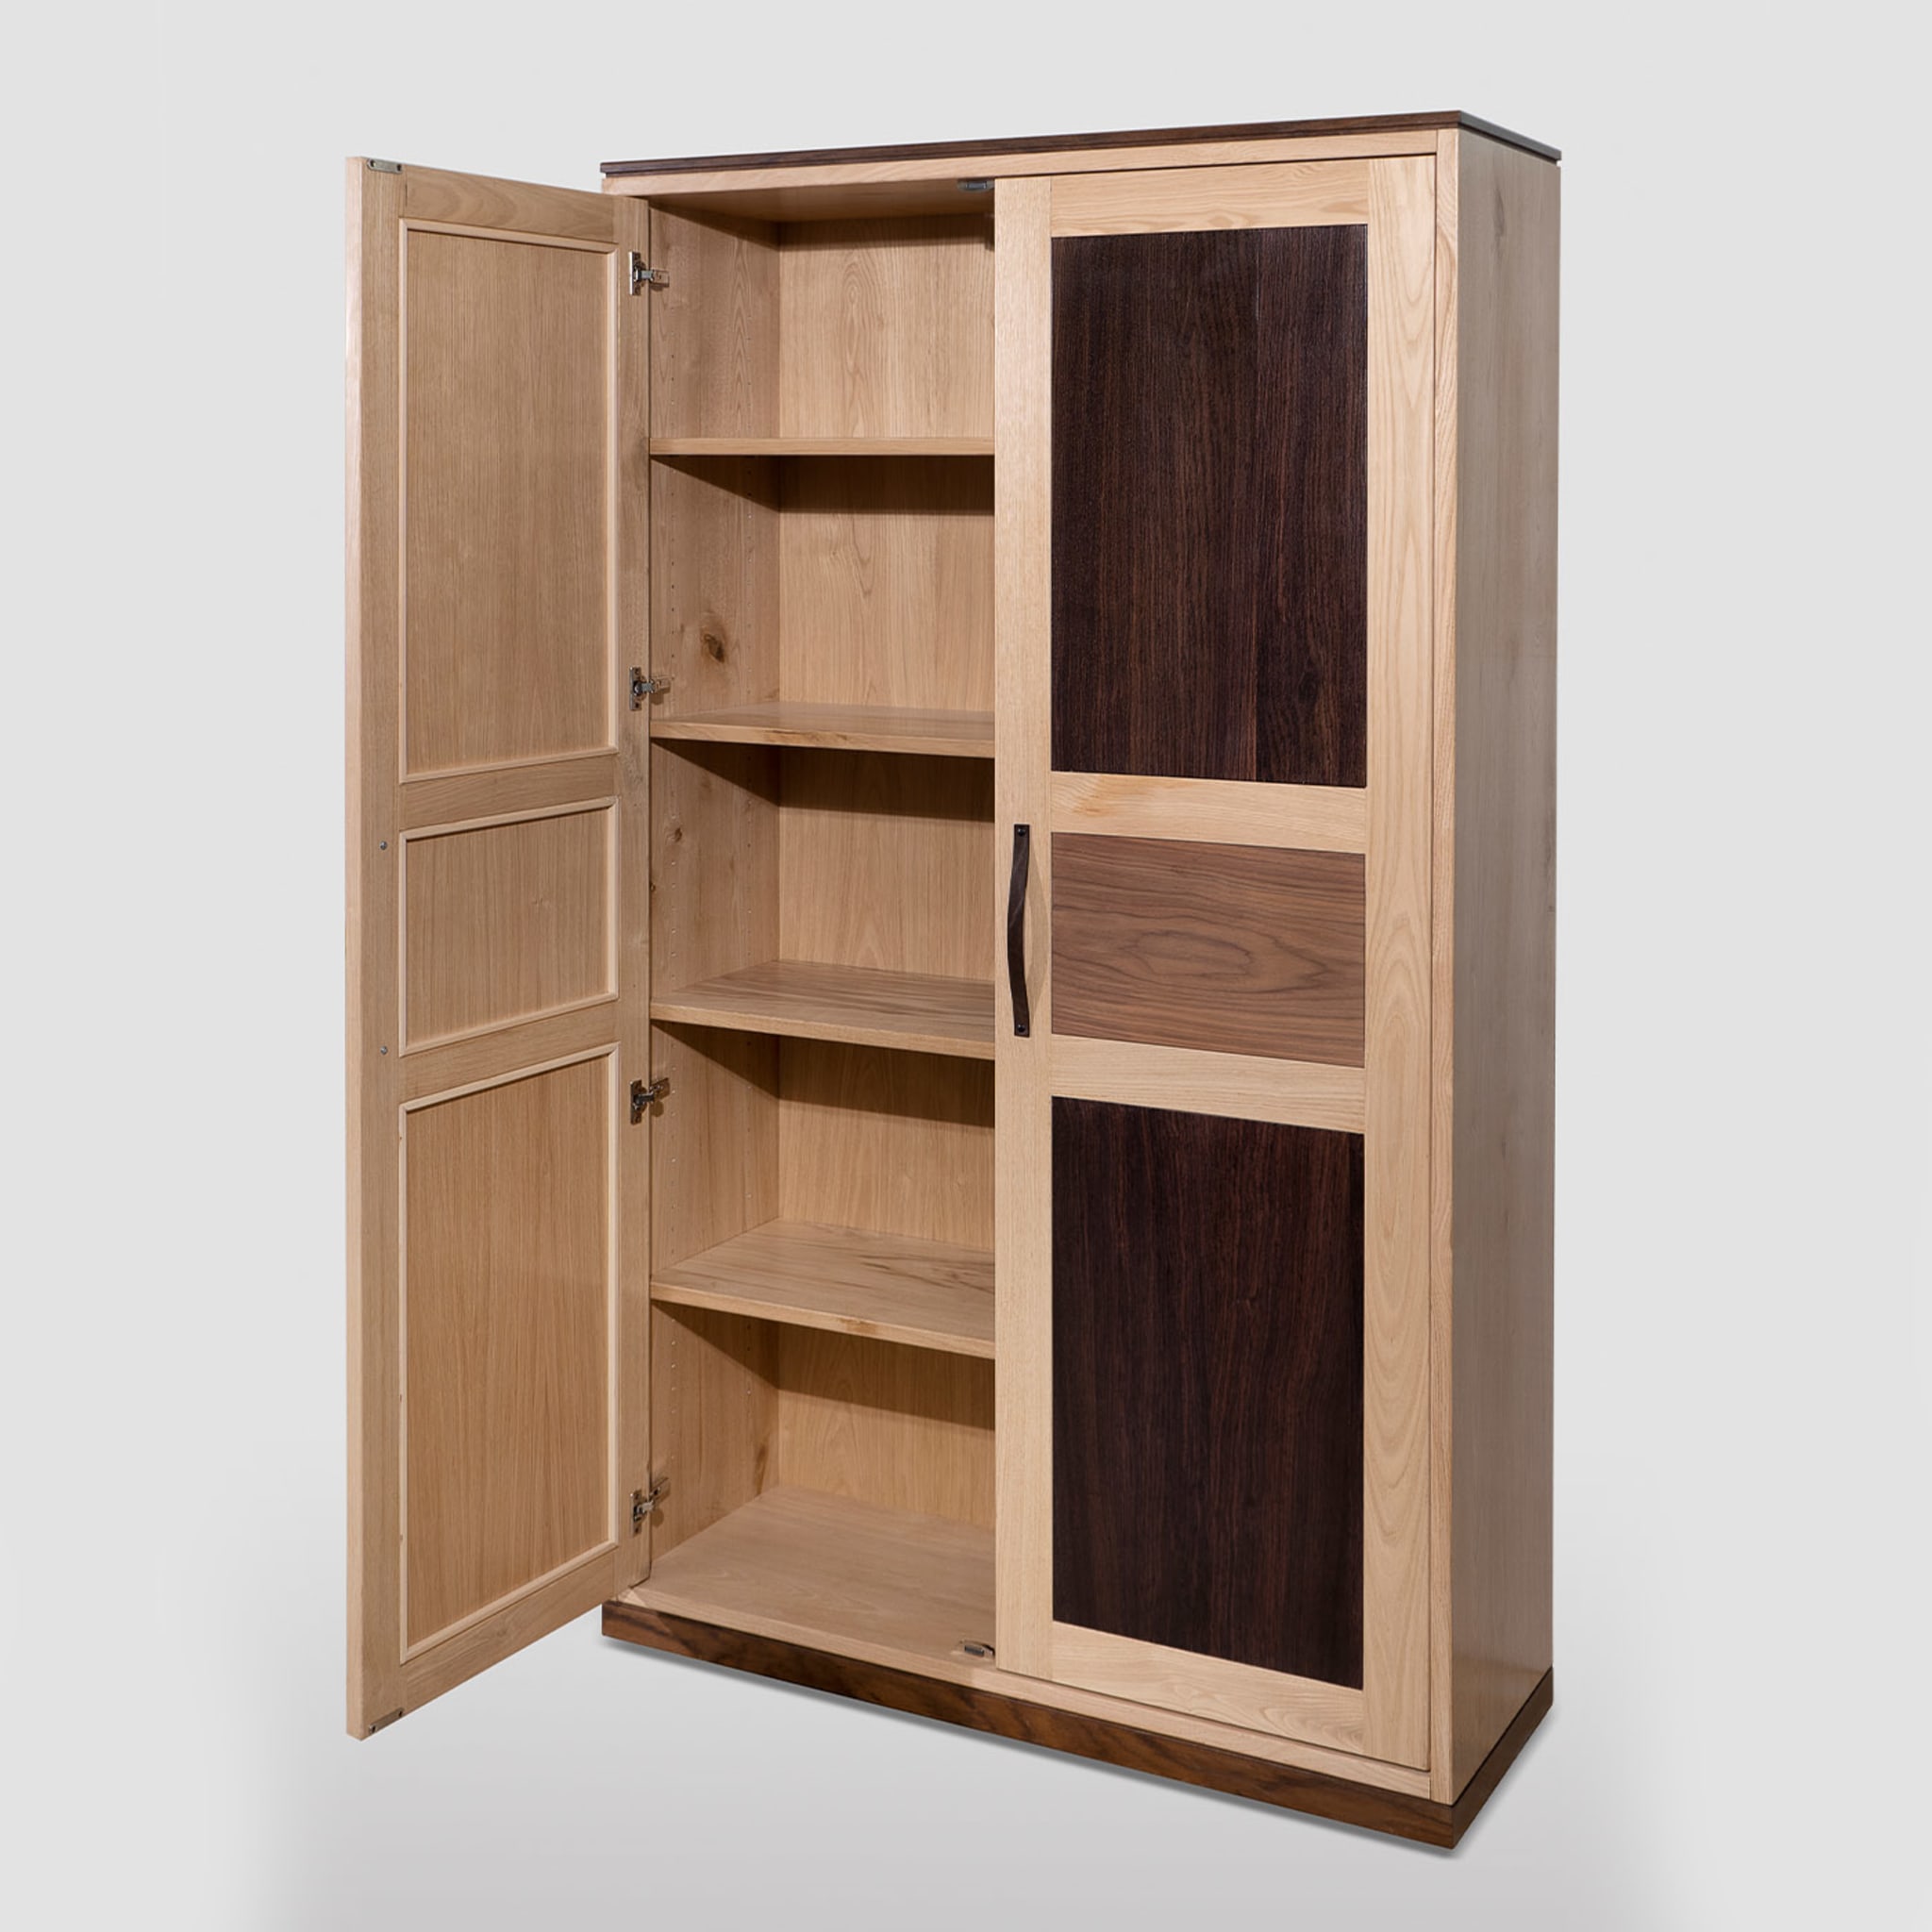 Mikael Two-Door Bookcase by Erika Gambella - Alternative view 5